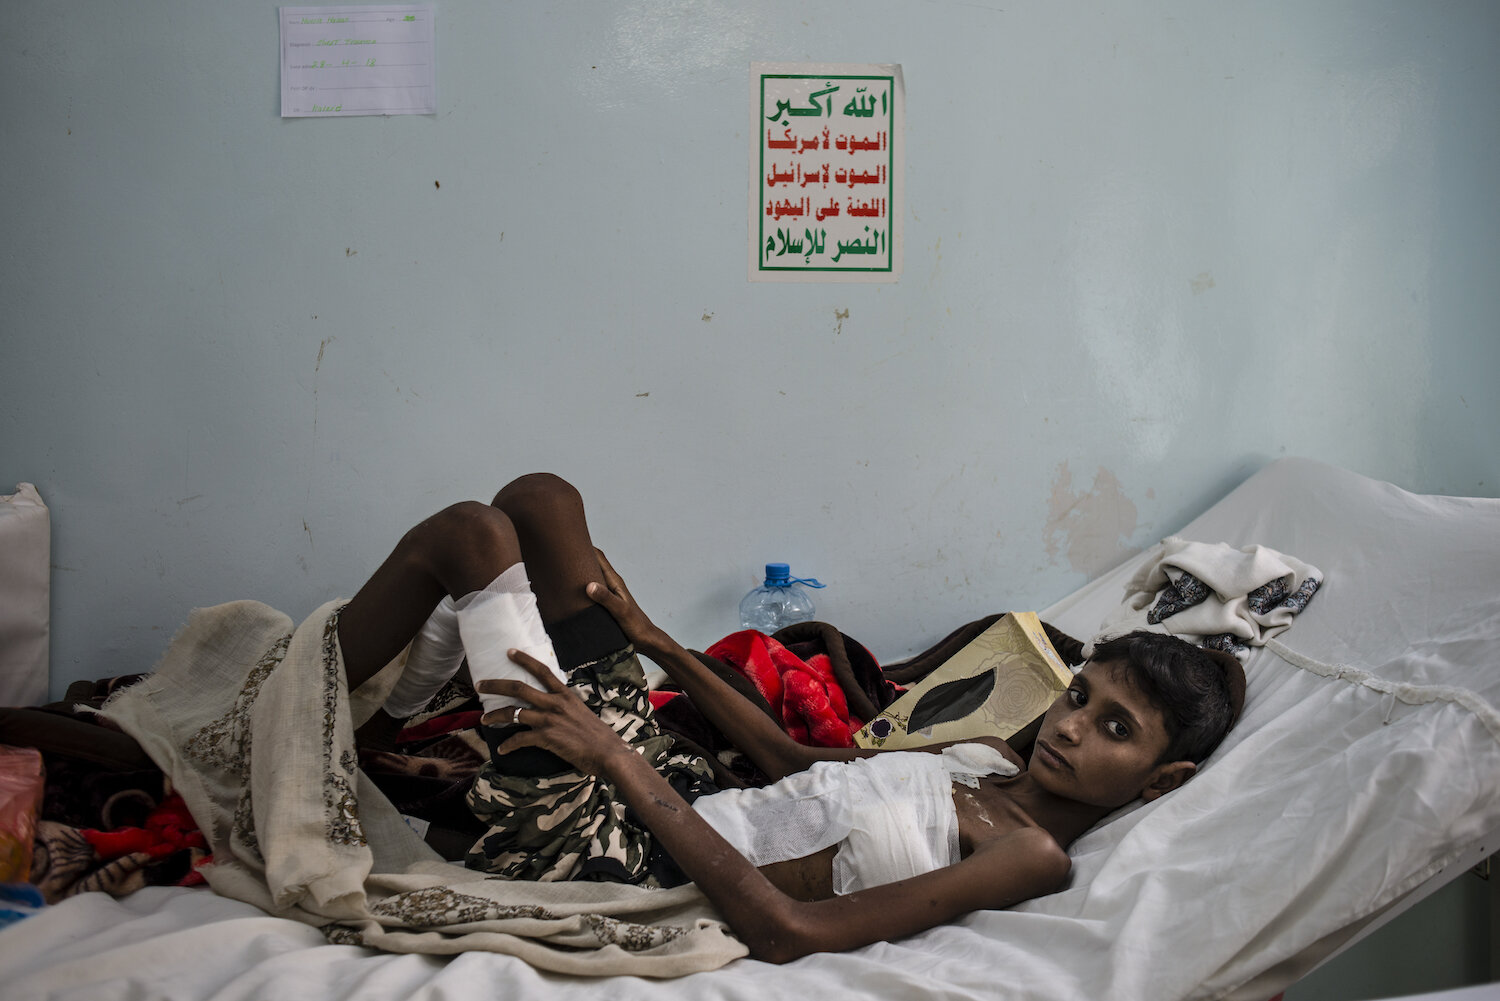  Hussein Hasan lays in bed on May 6, 2018 at Jumhuri Hospital in Hajjah, Yemen. Hussein was at the wedding when it was hit by an airstrike; he sustained severe abdominal and chest trauma and spent 10 days in intensive care. 